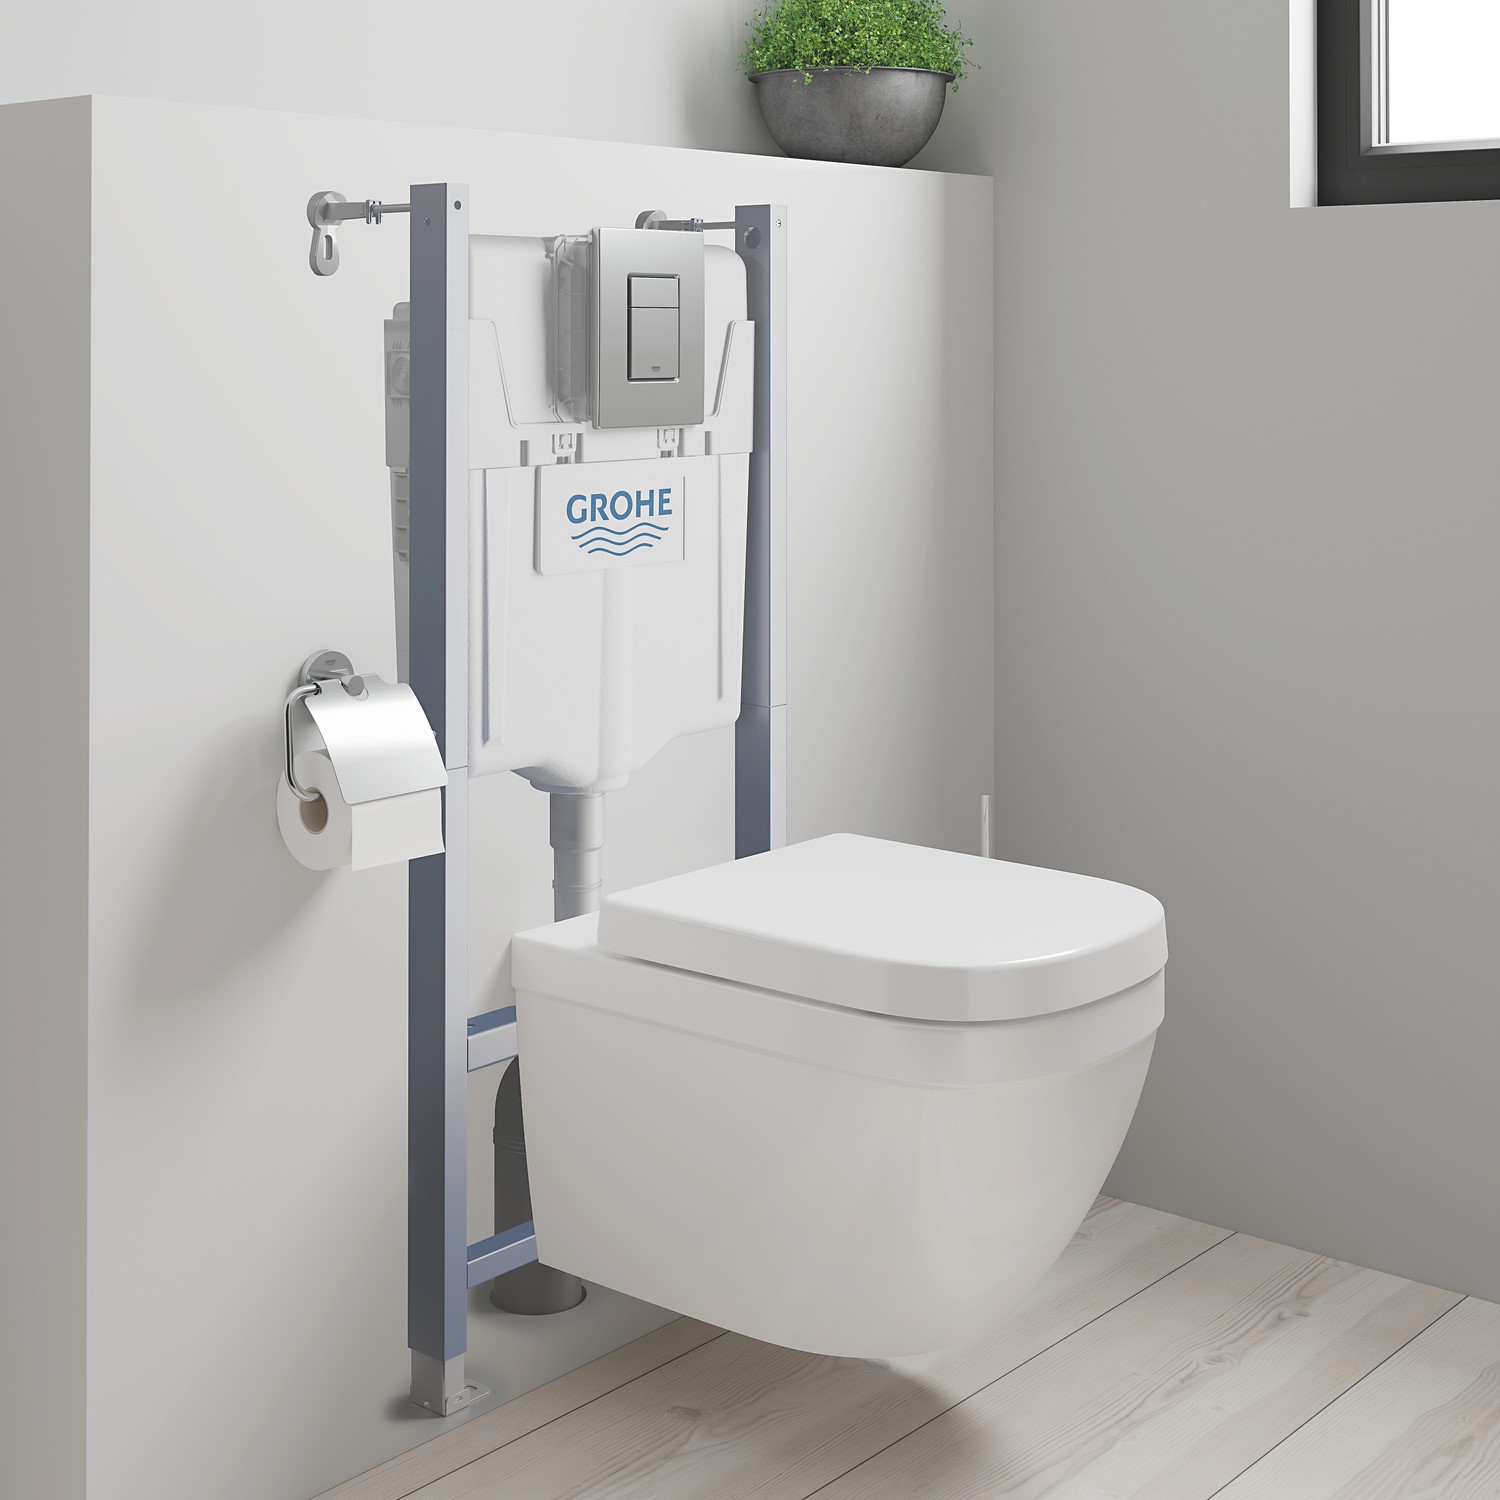 Alstublieft Afleiden Onhandig Grohe Euro Solido Wall Hung Rimless Toilet with Concealed Cistern Frame and  Flush Plate - Better Bathrooms